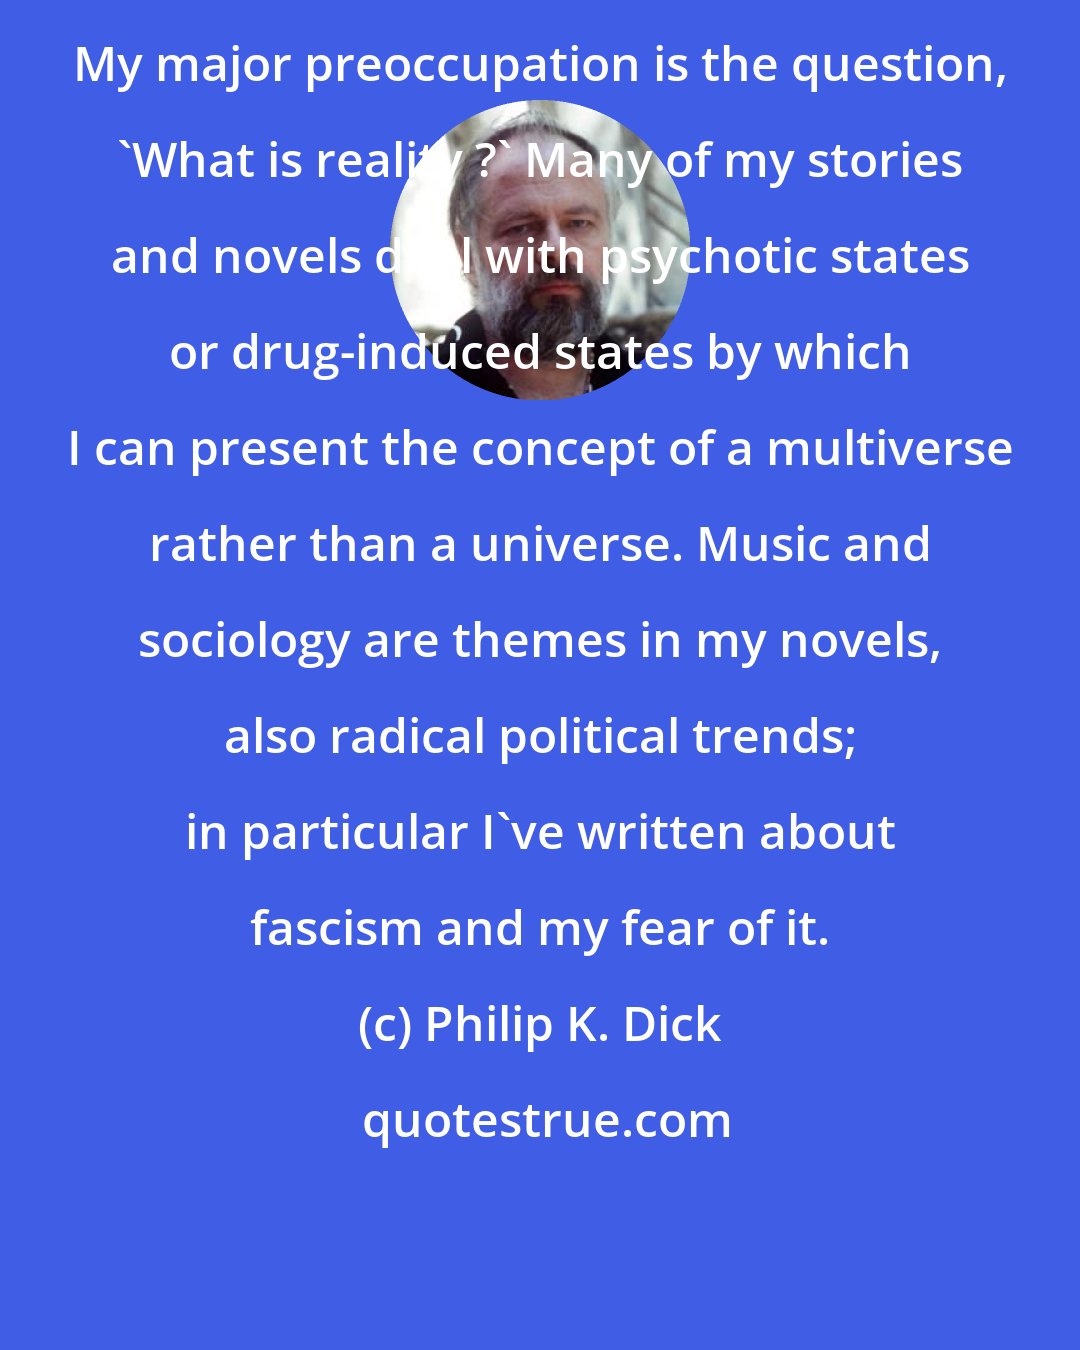 Philip K. Dick: My major preoccupation is the question, 'What is reality ?' Many of my stories and novels deal with psychotic states or drug-induced states by which I can present the concept of a multiverse rather than a universe. Music and sociology are themes in my novels, also radical political trends; in particular I've written about fascism and my fear of it.